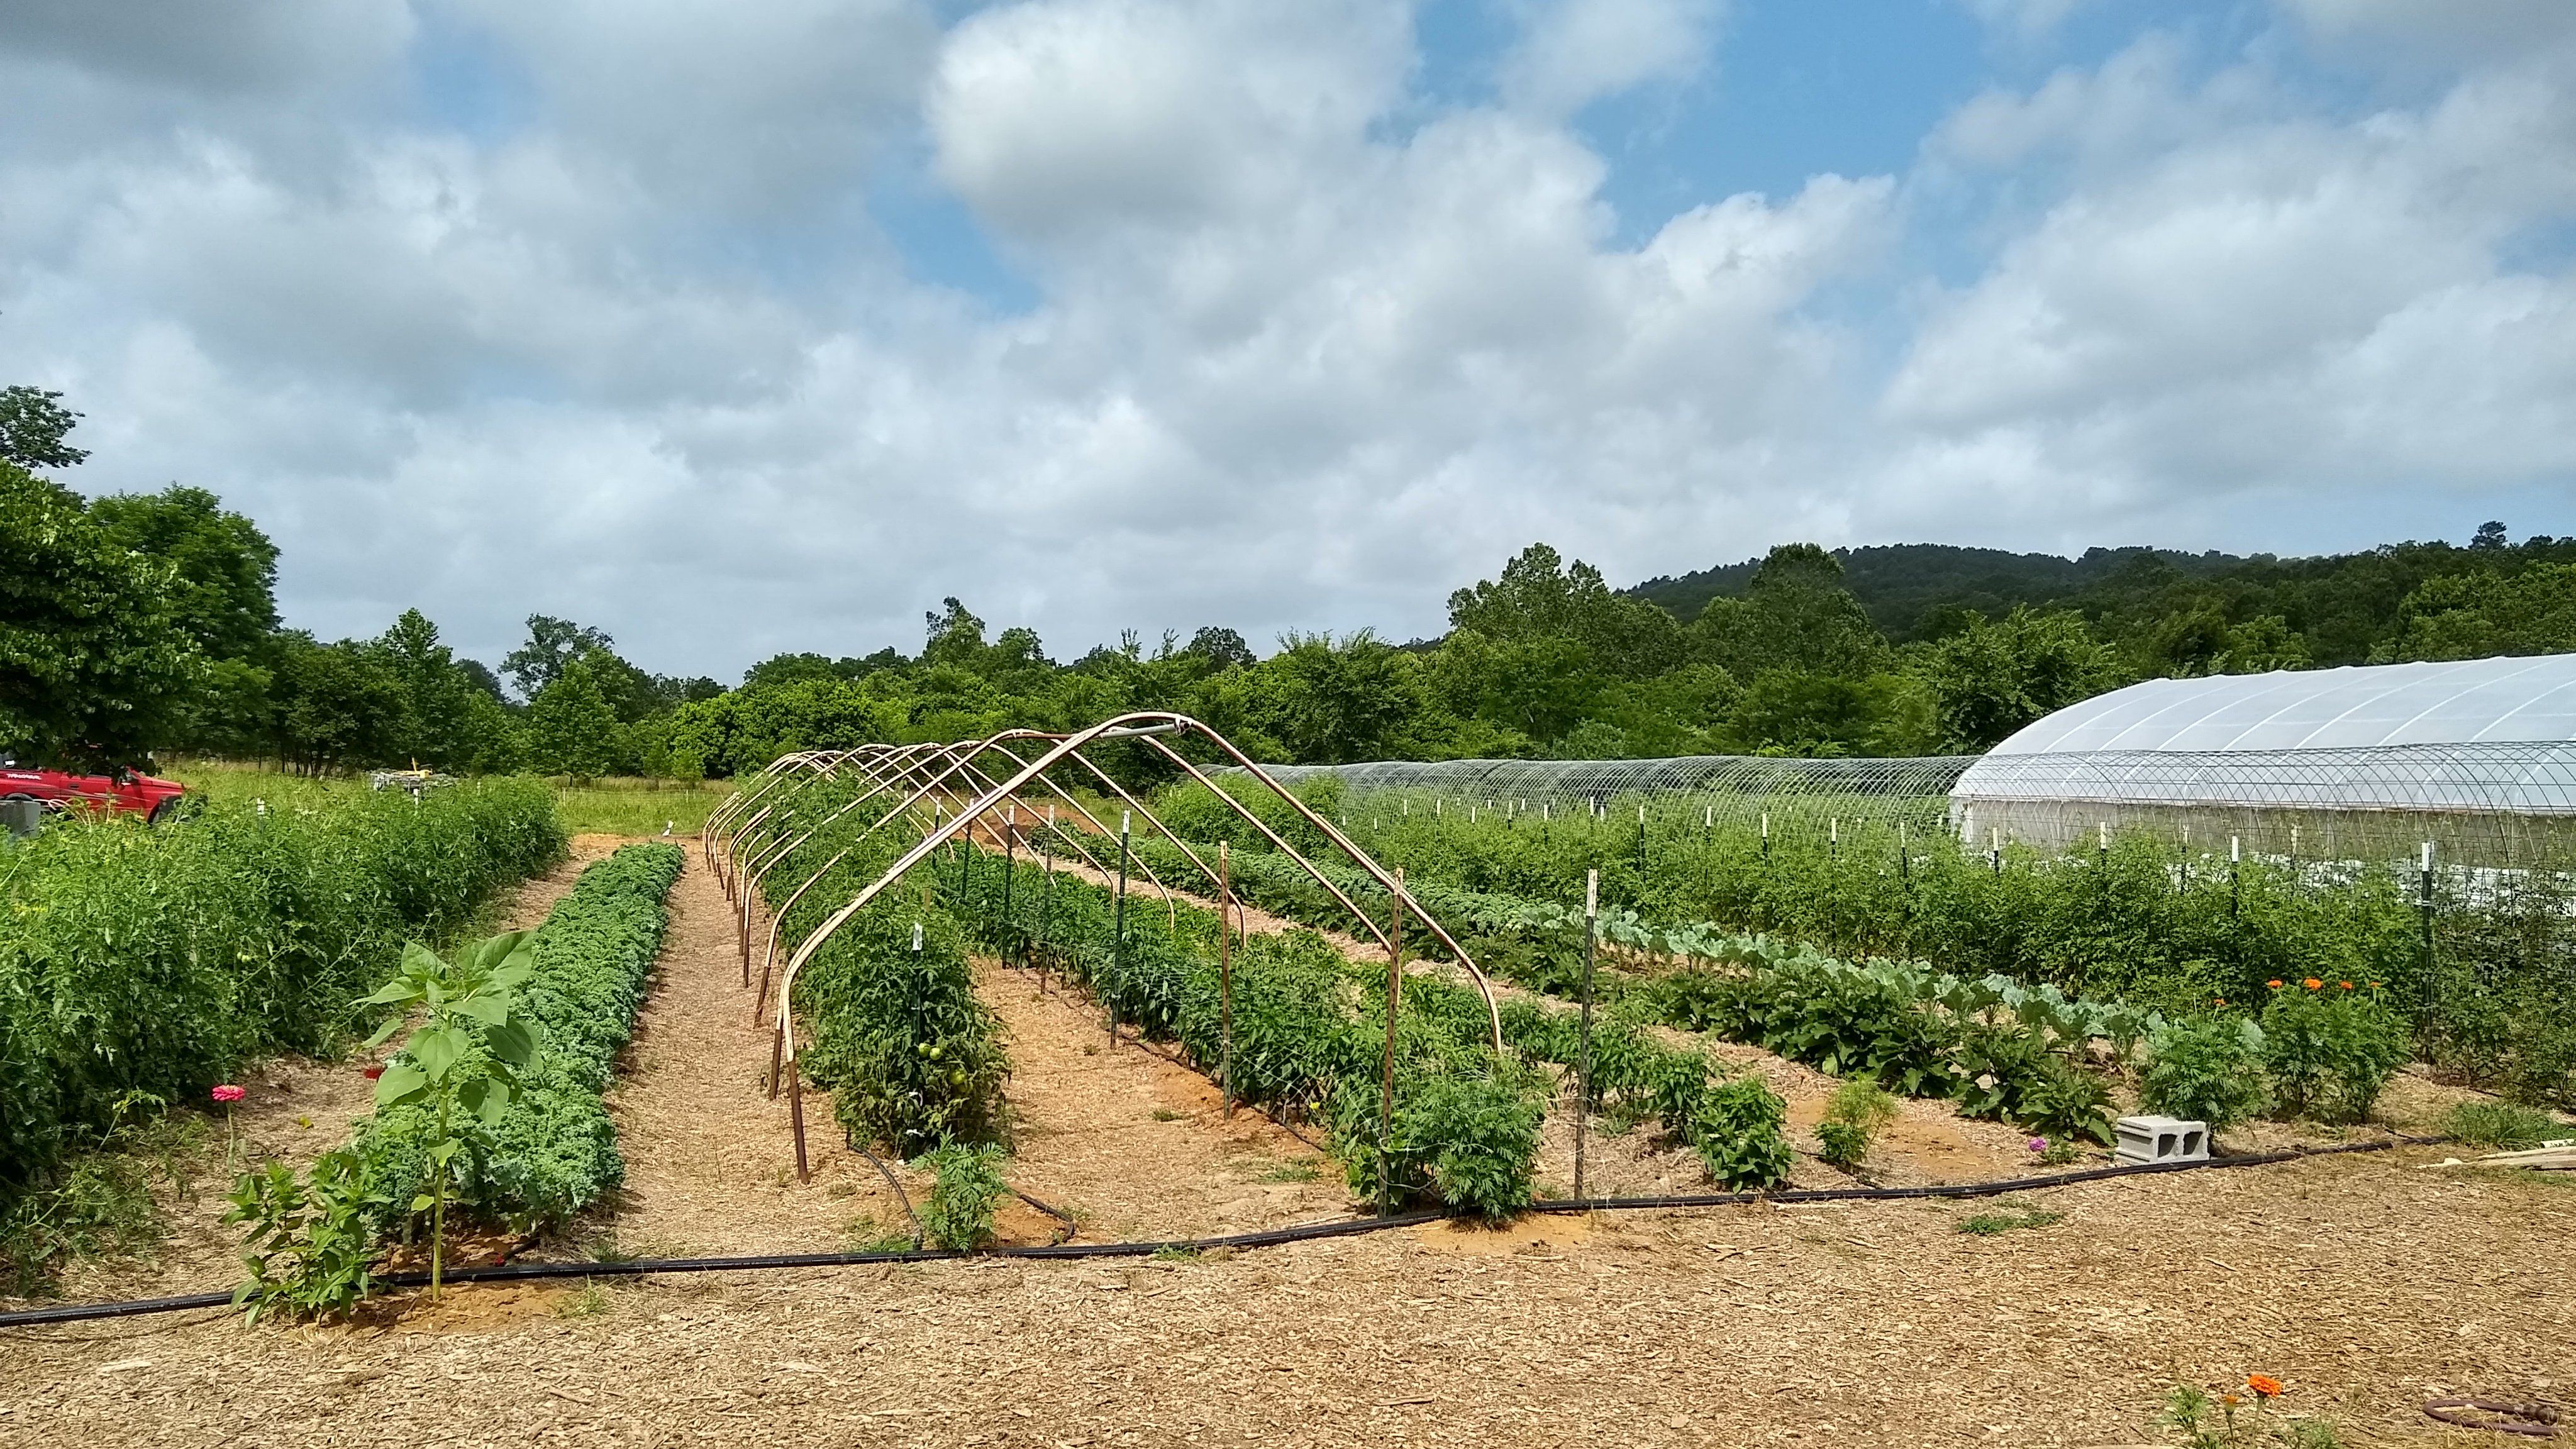 Previous Happening: Farm Happenings for July 4, 2020